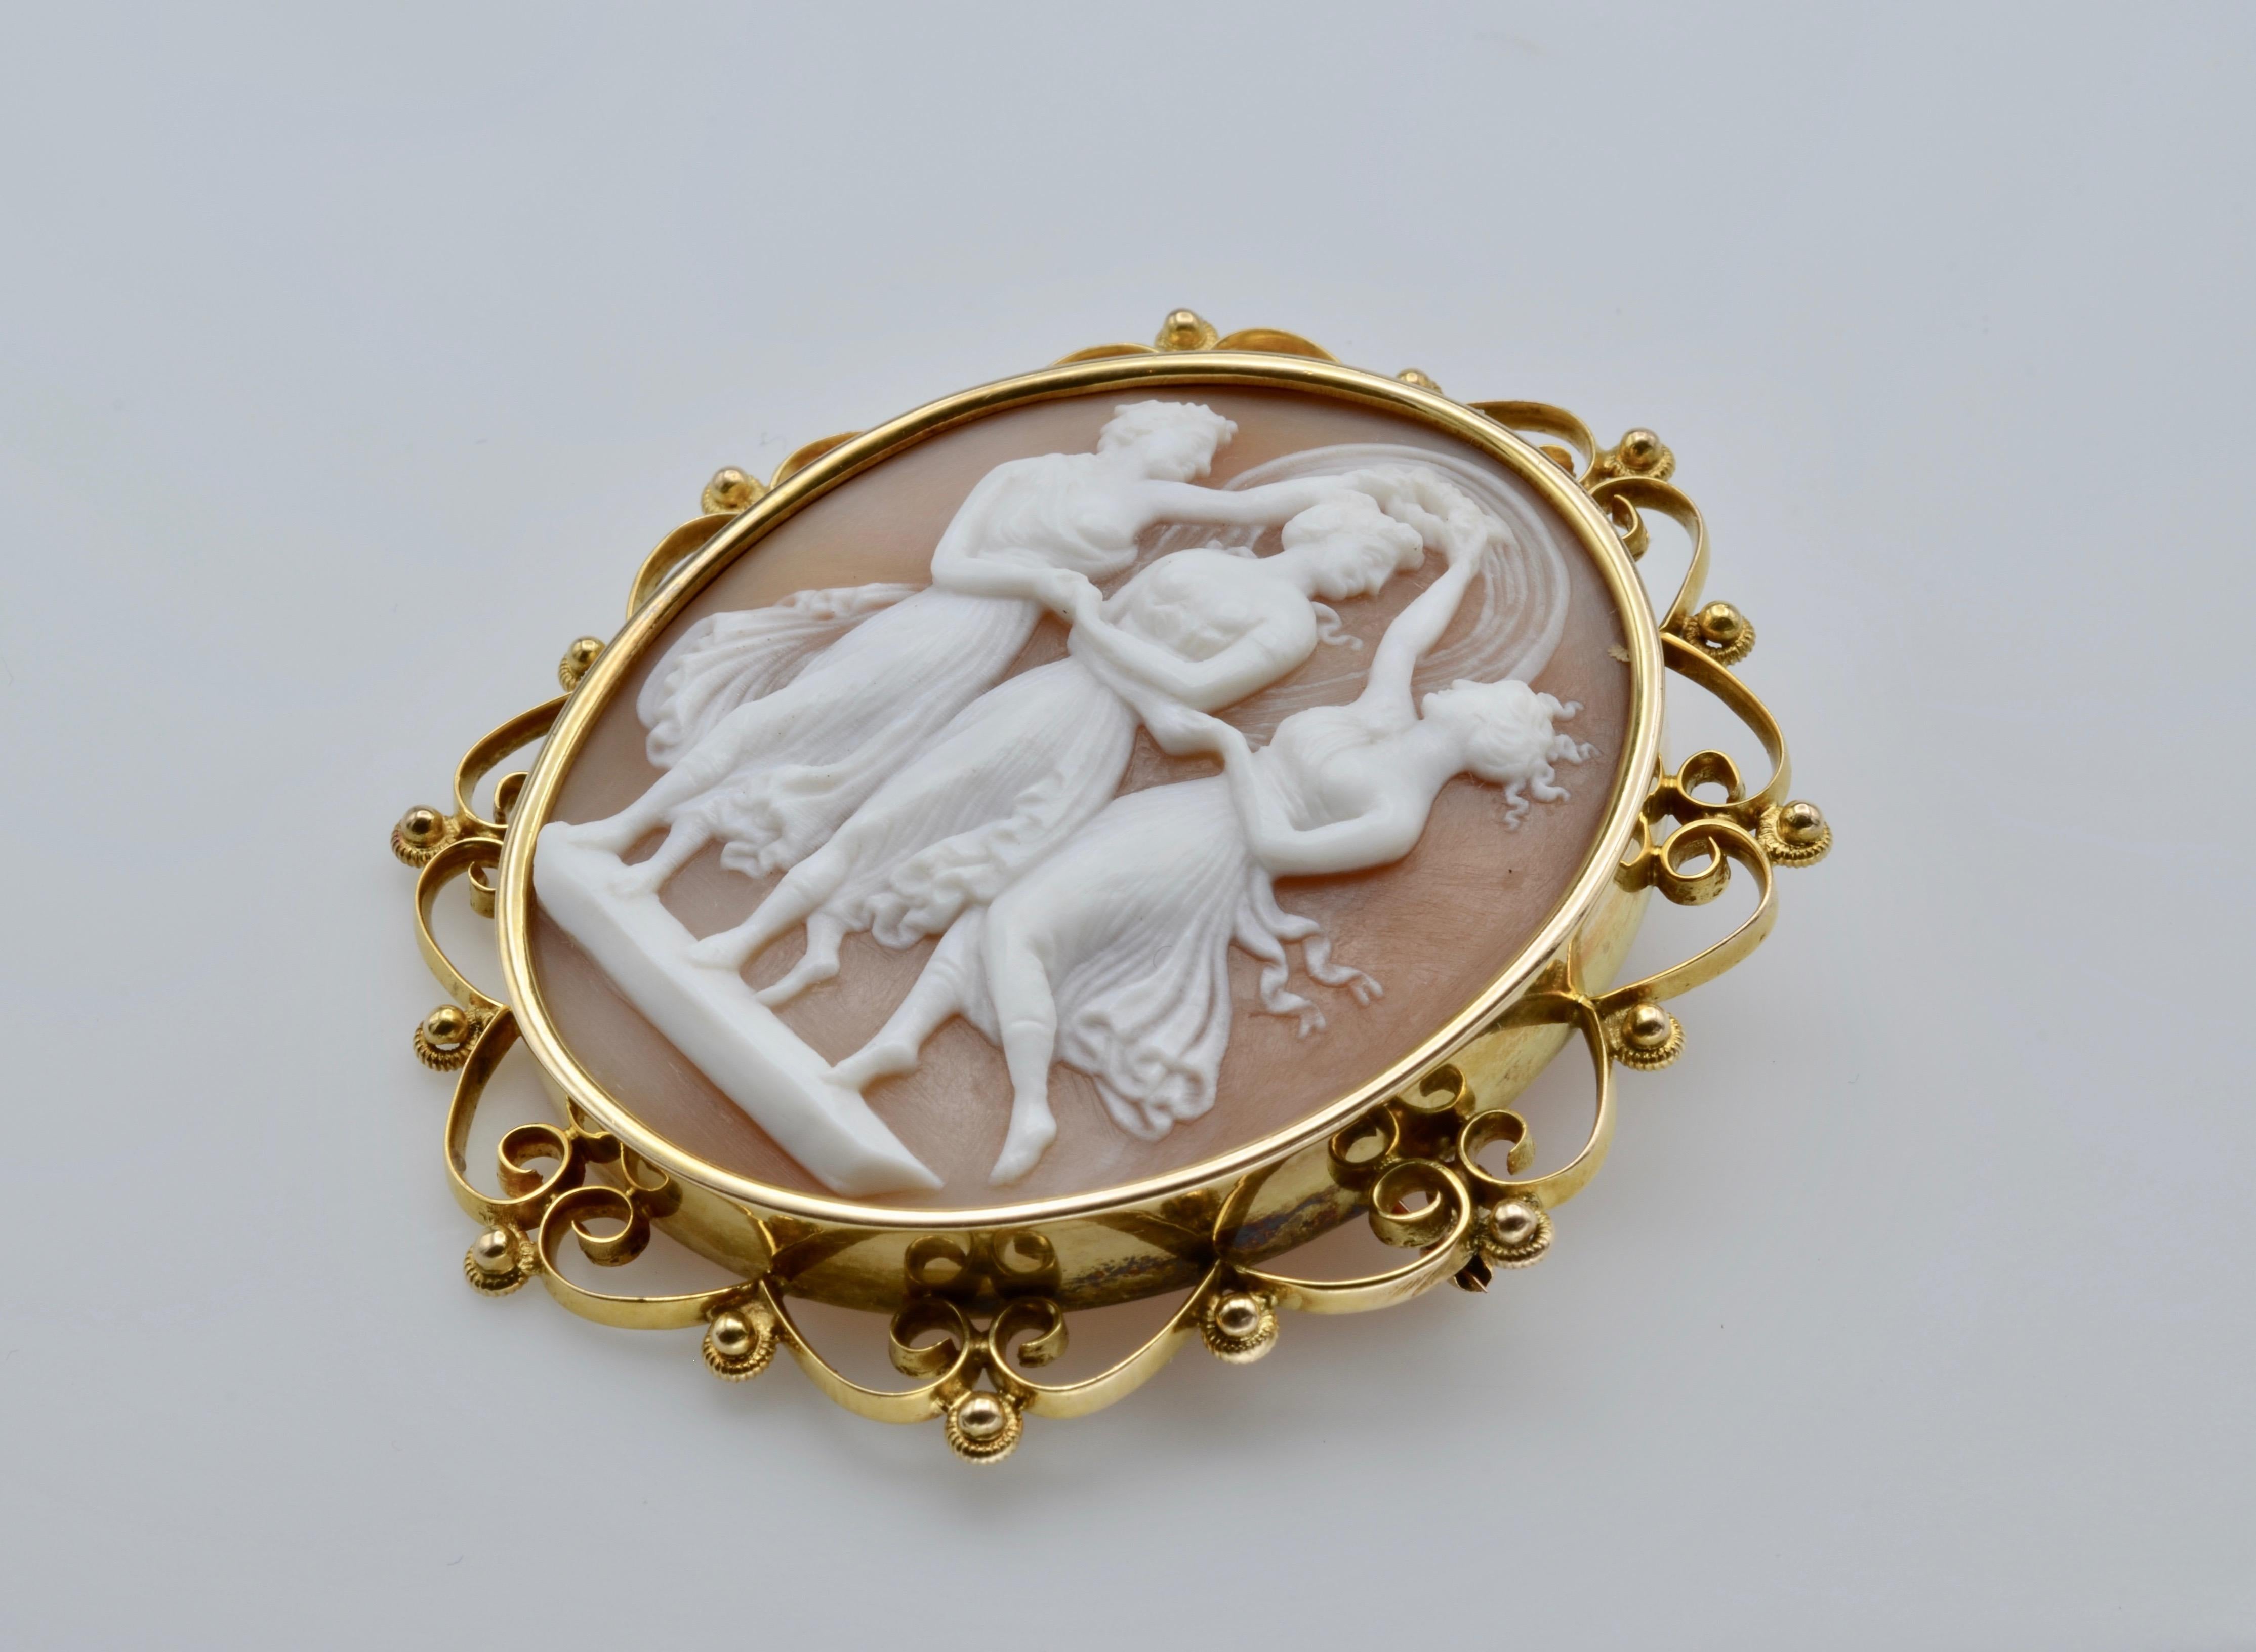 This elegant cameo brooch from the Late Victorian era is an excellent example of shell carving depicting the three Graces. The 14k gold setting is a wonderful filigree design that adds to the fluidity of the dancers in movement. The pin has a secure